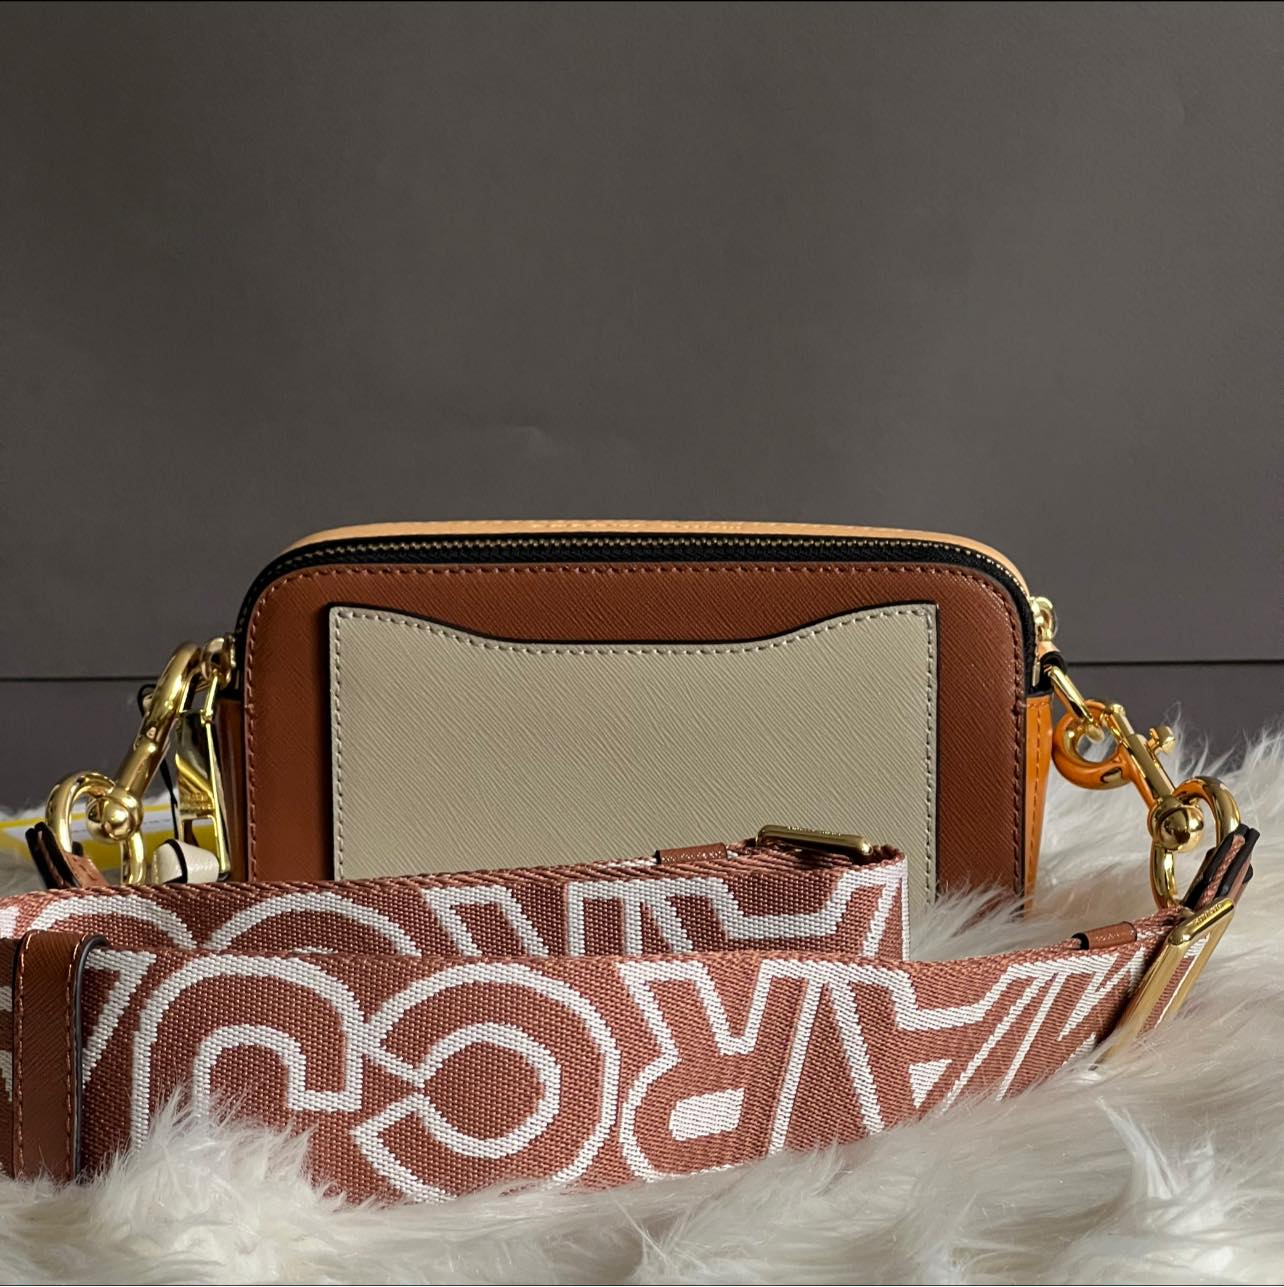 Marc Jacobs Snapshot Bag In Argan Color Leather in Brown